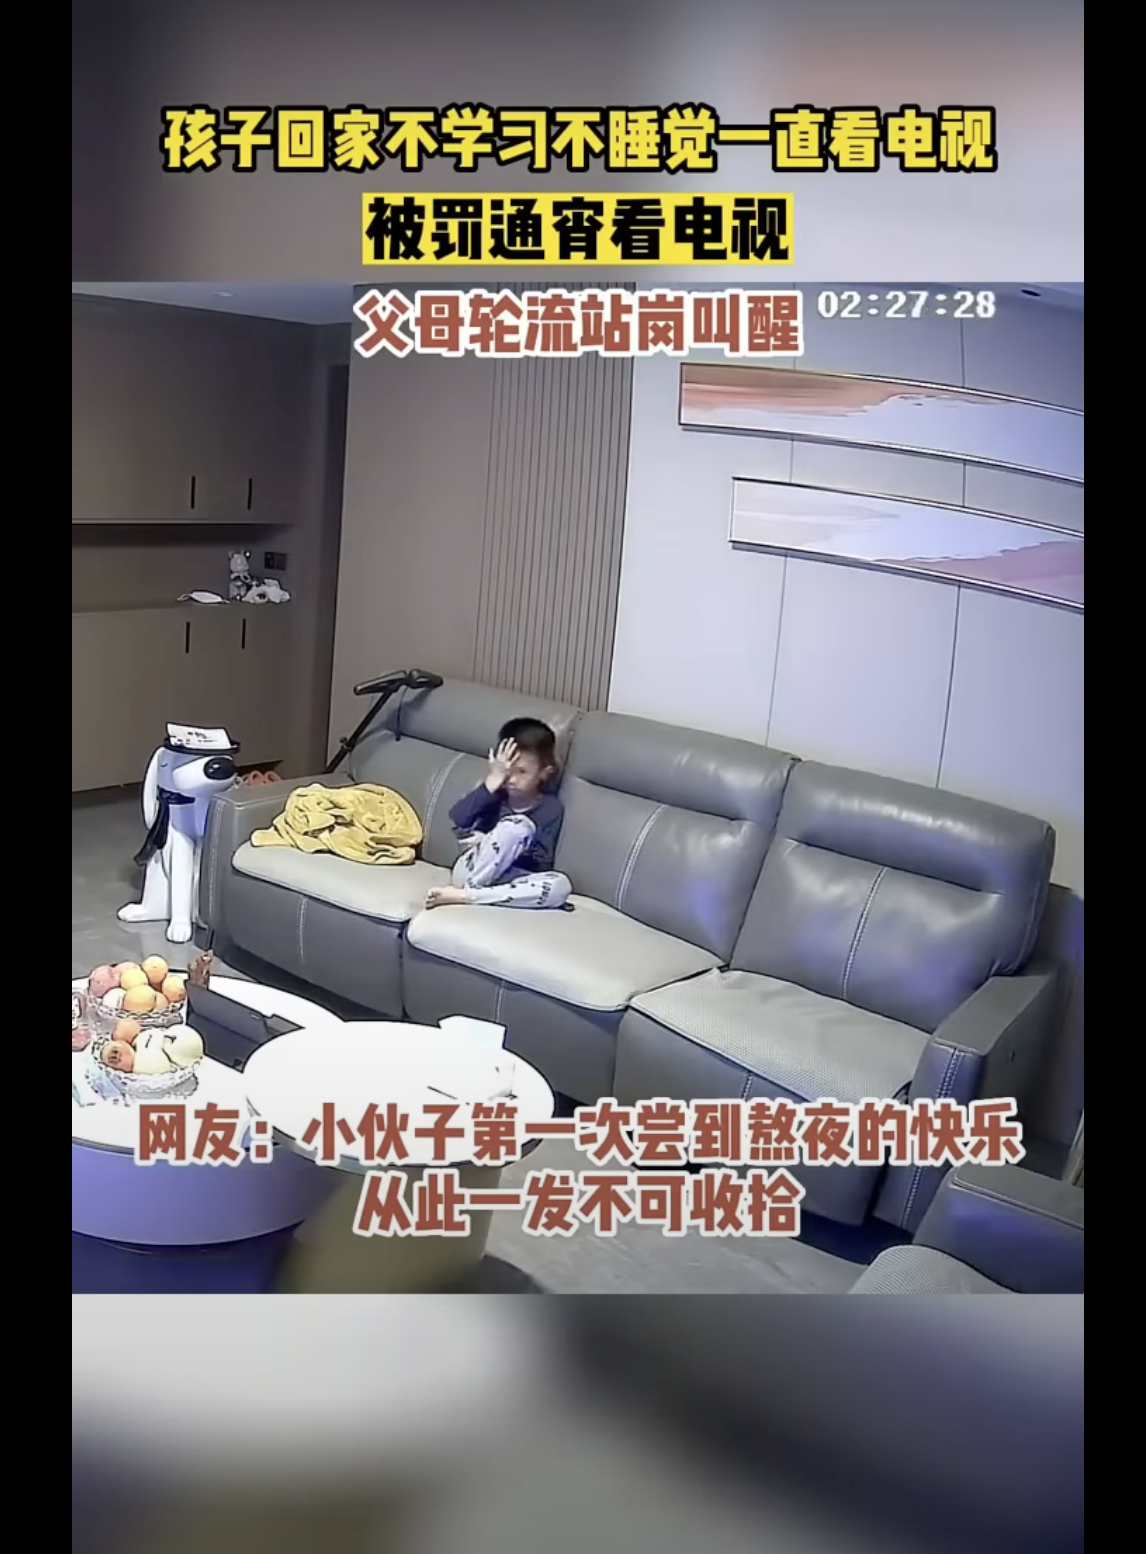 The boy is pictured sitting on the sofa in the living room. | Source: youtube.com/趣事大赏